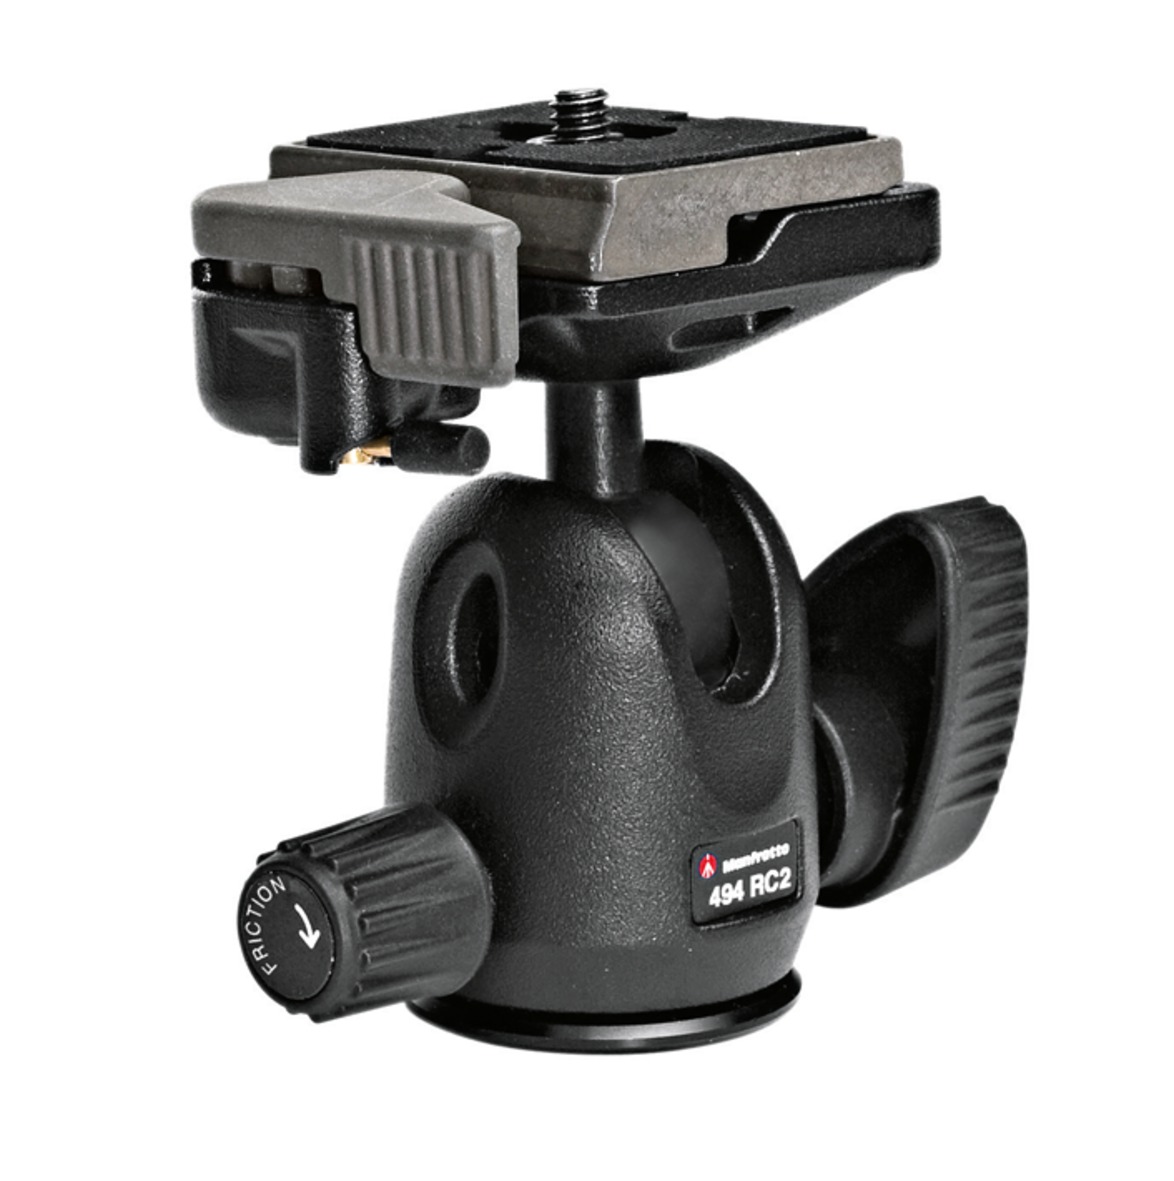 rotule-manfrotto-494RC2